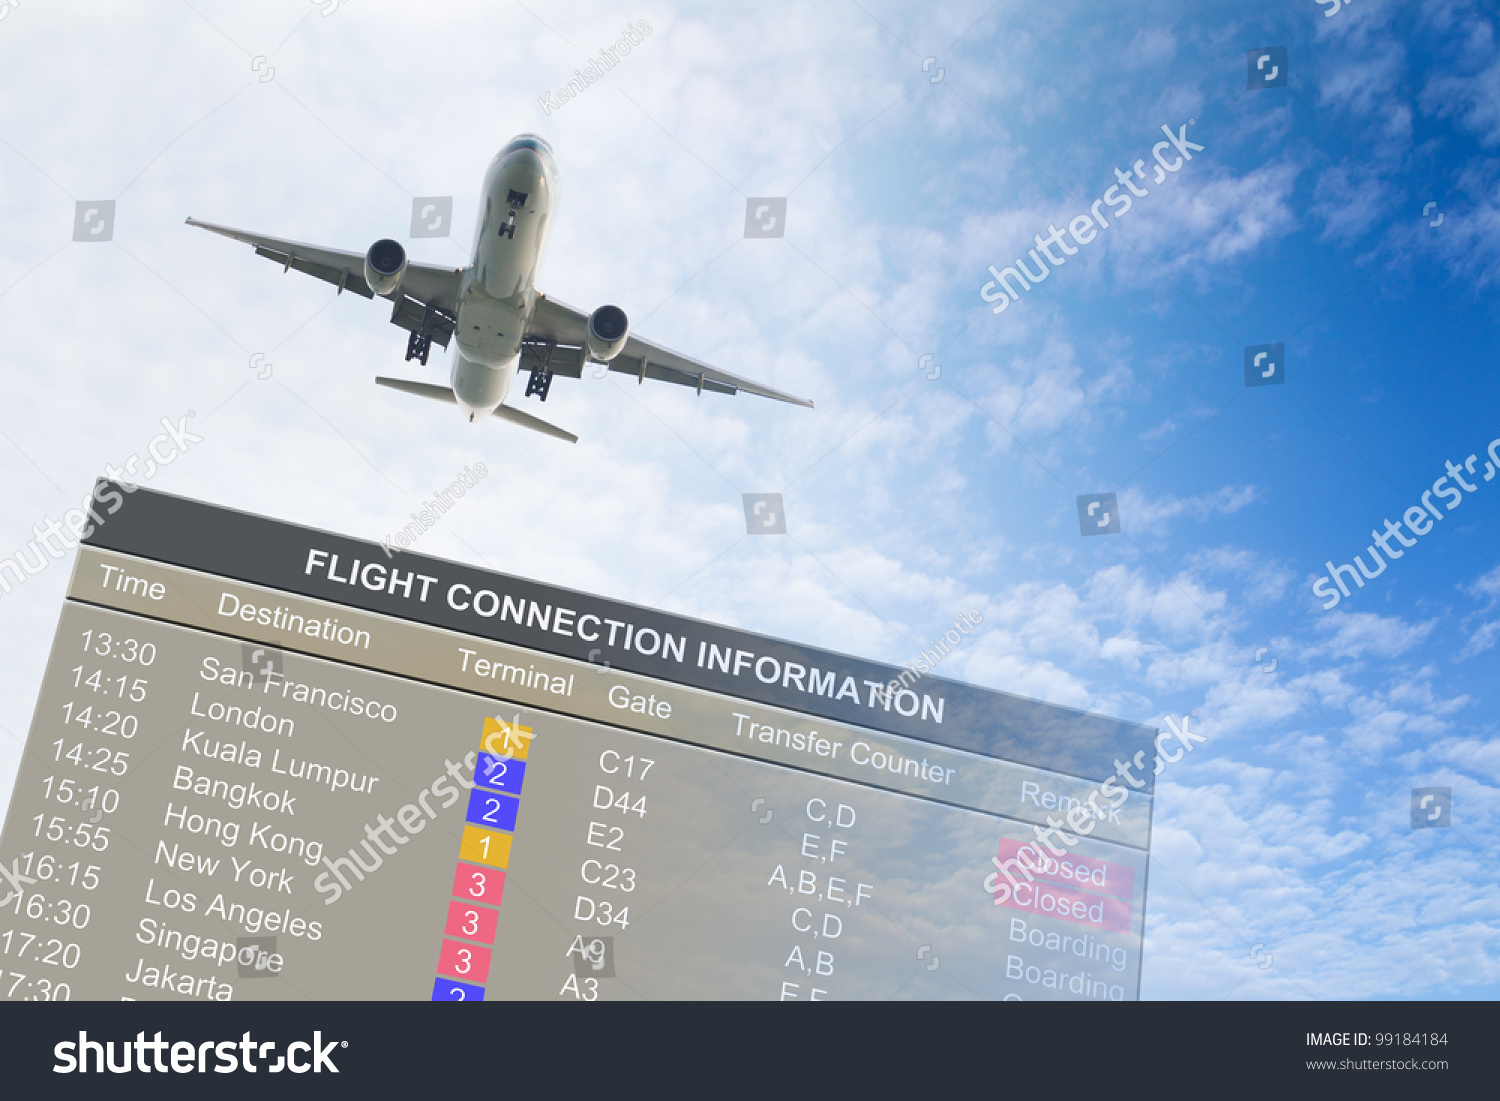 http://image.shutterstock.com/z/stock-photo-airplane-flying-over-an-information-board-against-blue-cloudy-sky-99184184.jpg